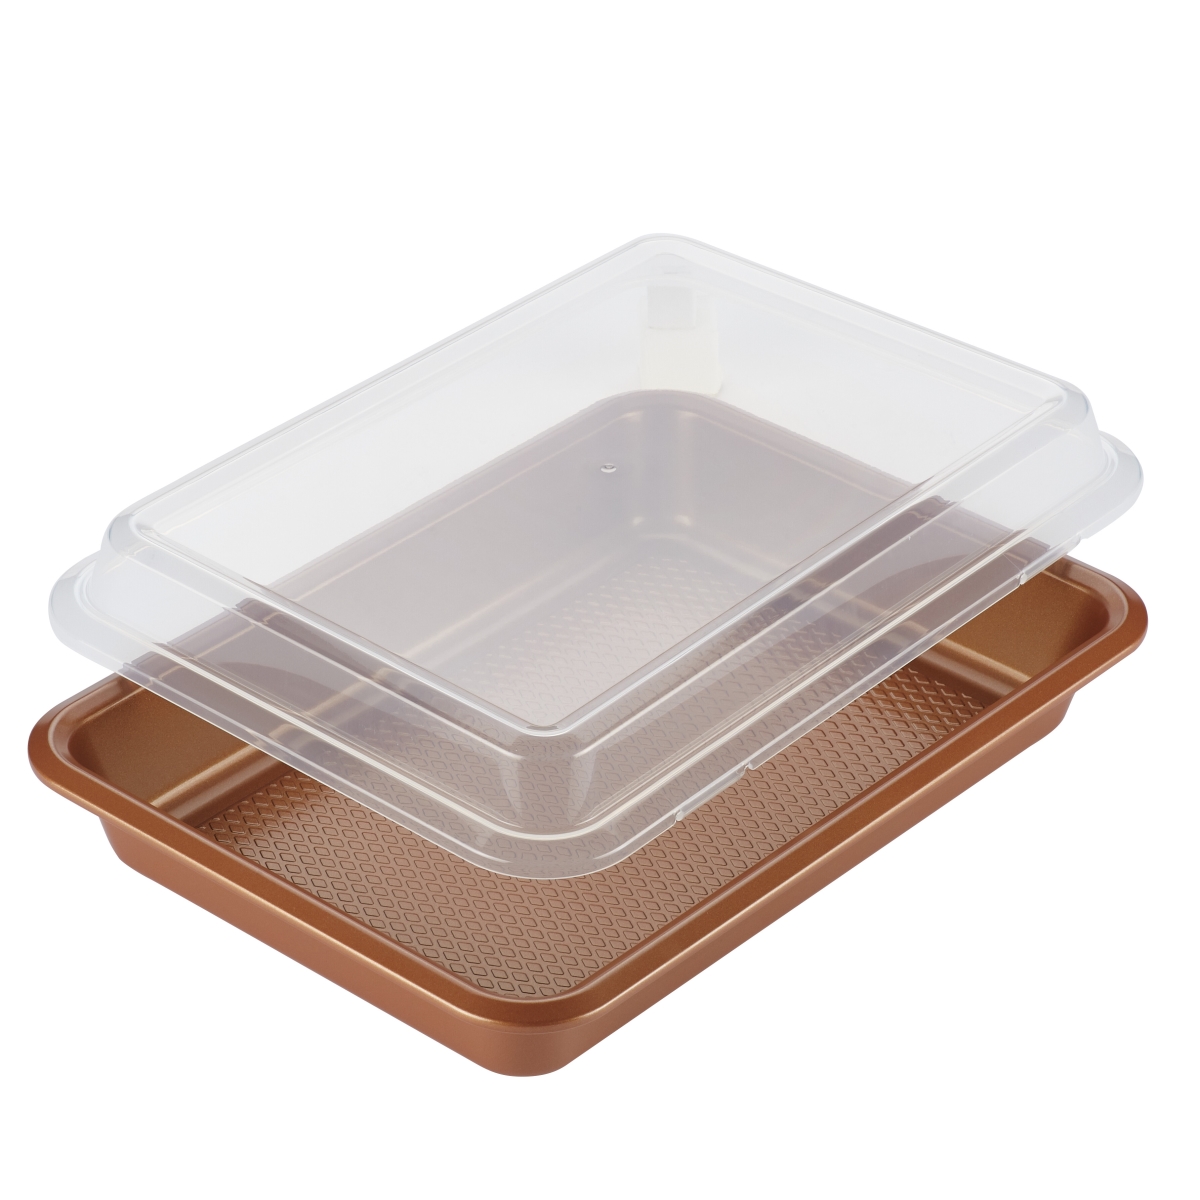 Picture of Ayesha Curry 47004 Covered Cake Pan, 9 x 13 in. - Copper